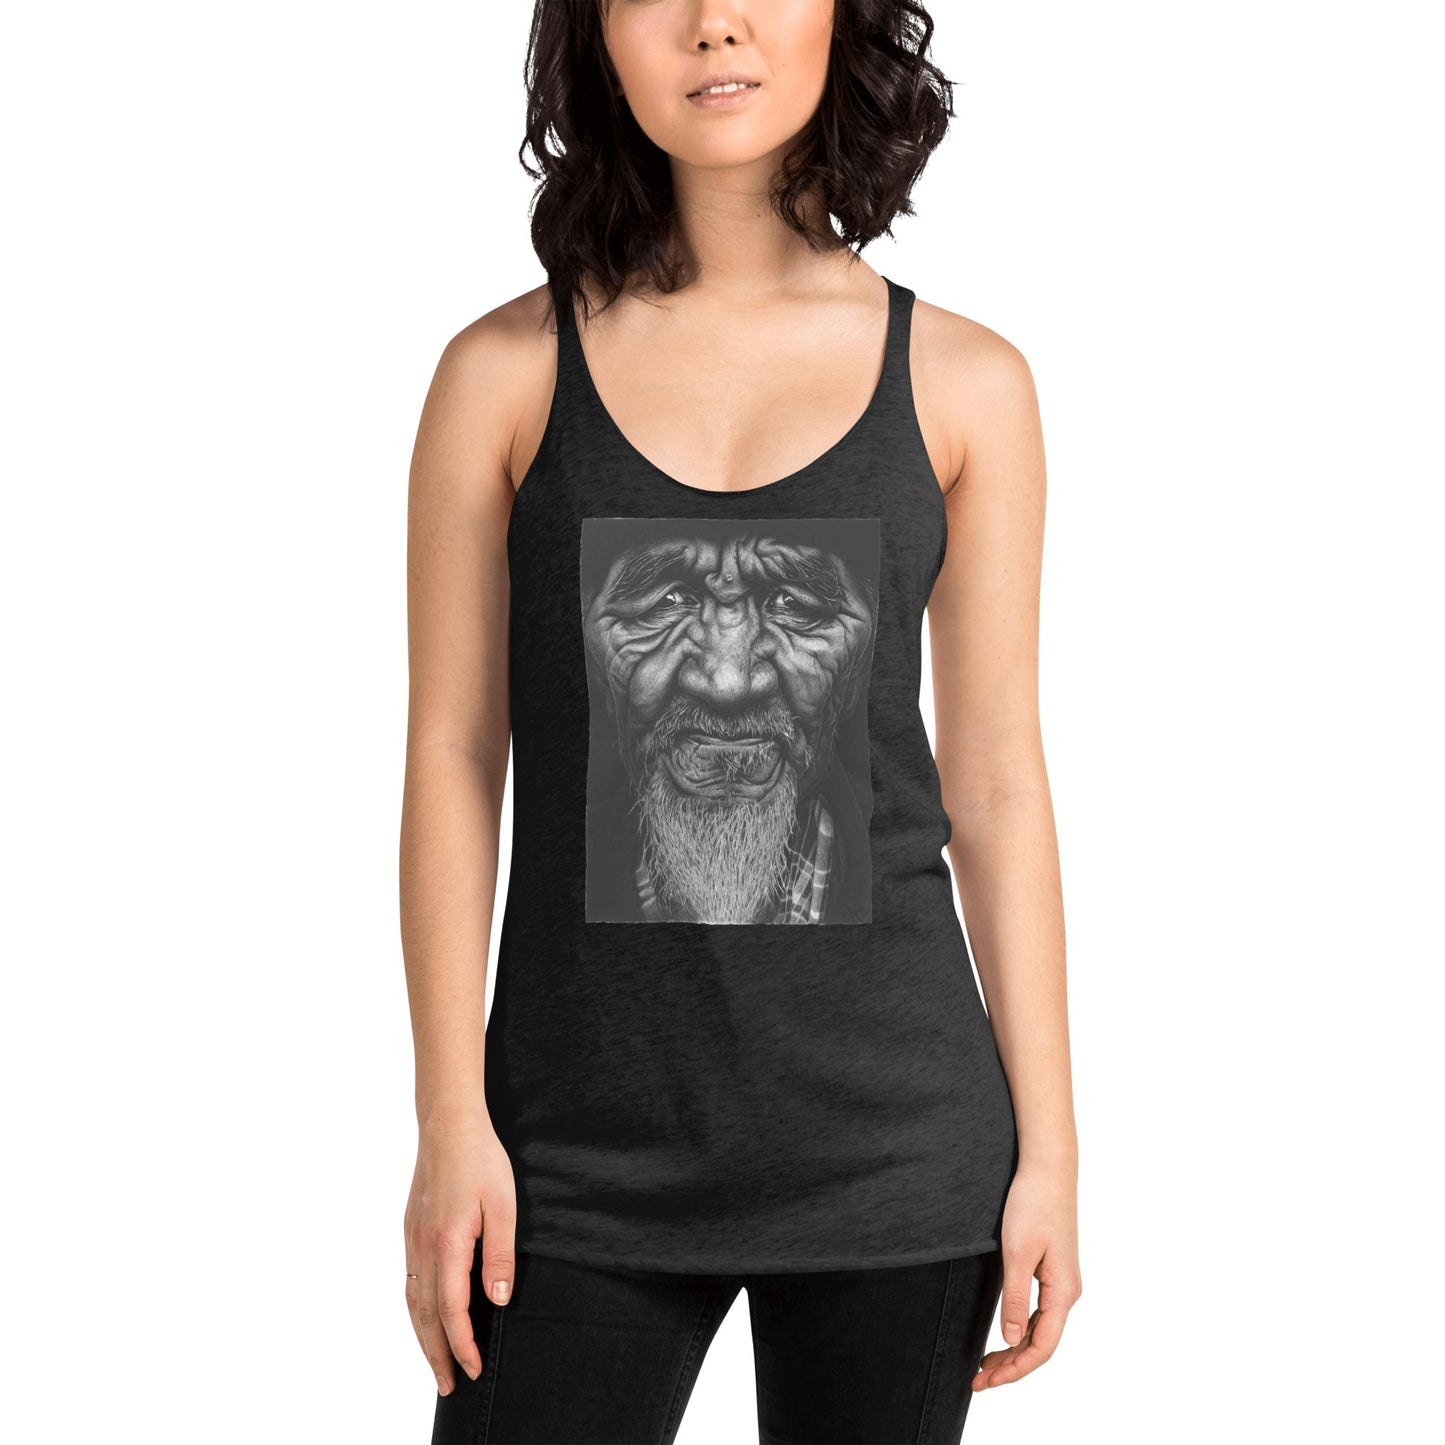 "Windows to the soul" - The Exile prison art Print on Demand The Exile Tank Top Small